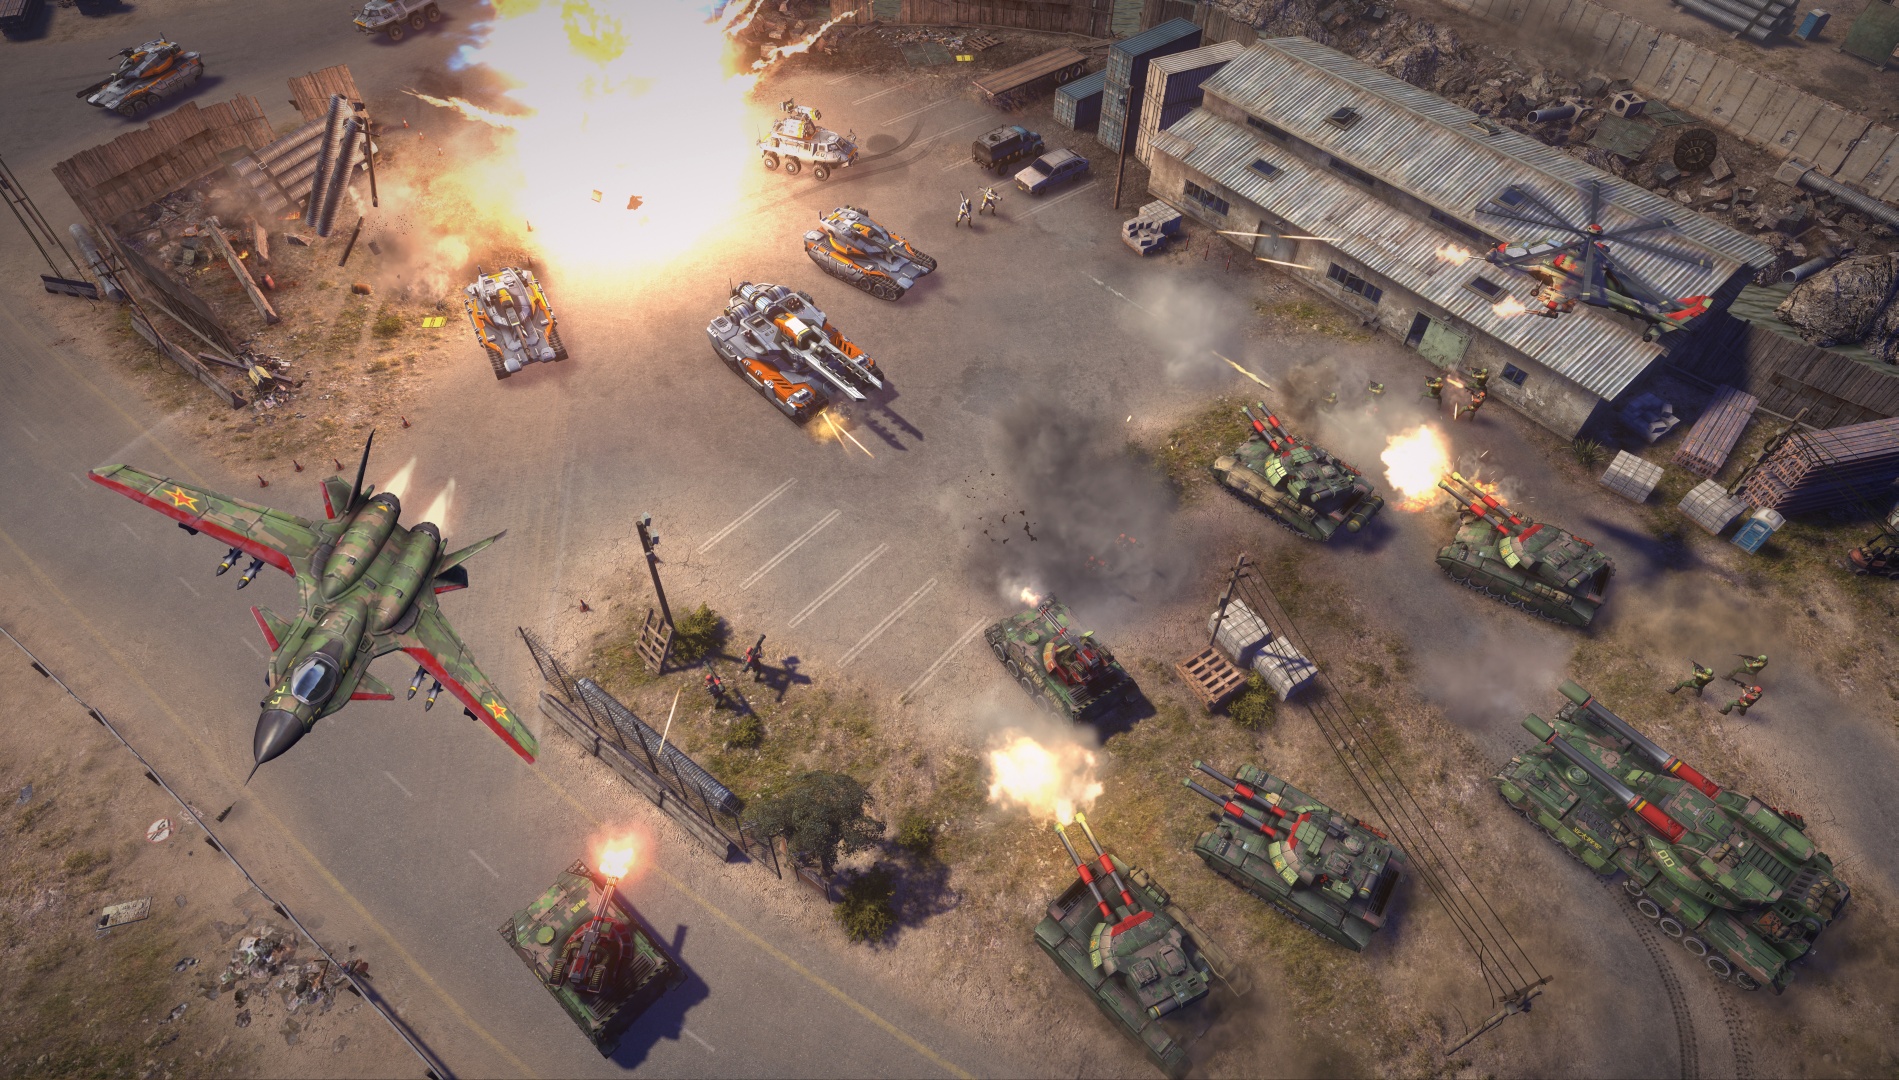 Command-Conquer-Free-to-Play-Gets-New-Screenshots-2.jpg?1361893700